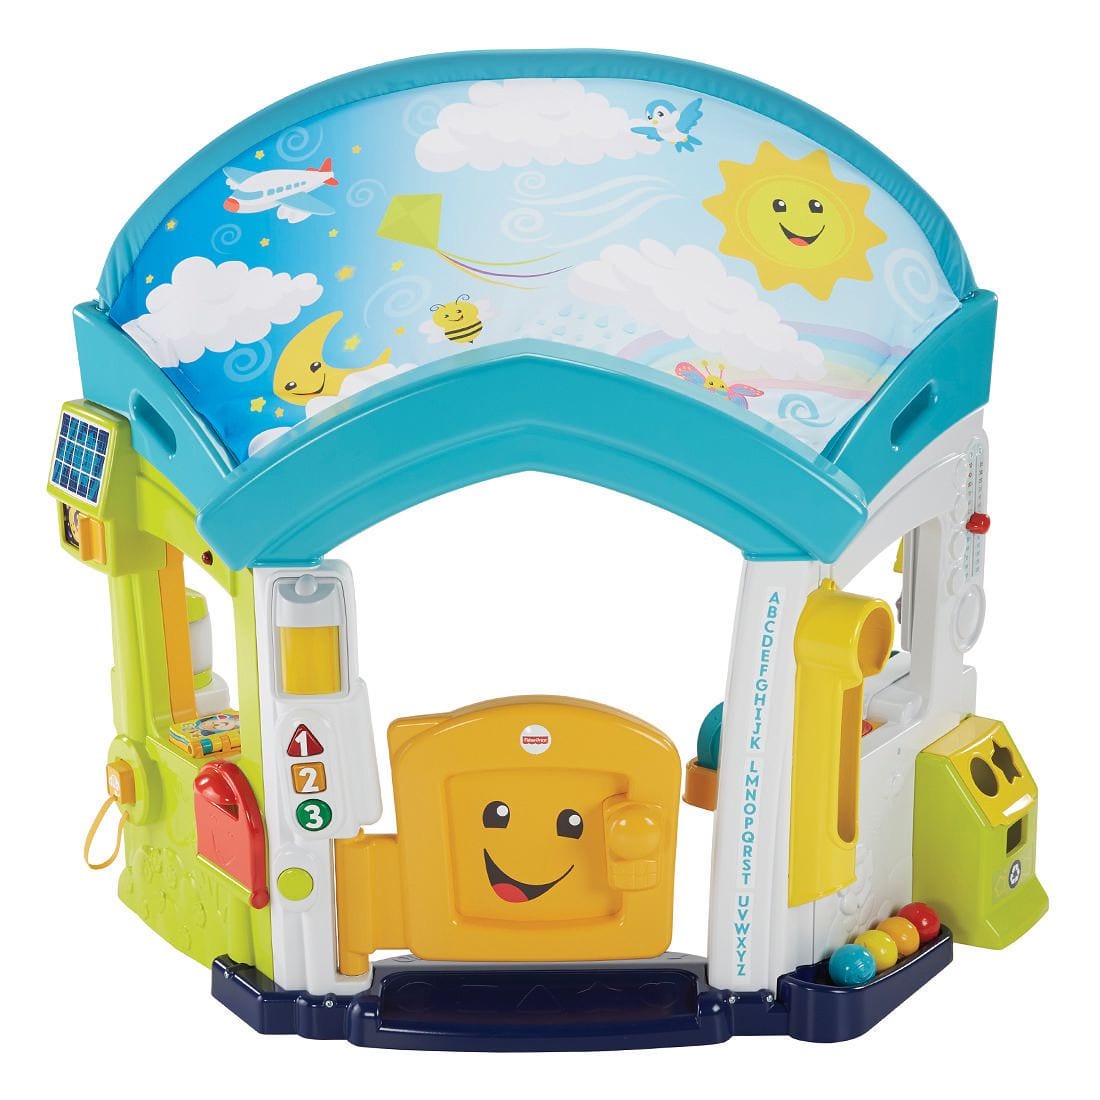 A.J.'s Fisher Price Smart Home